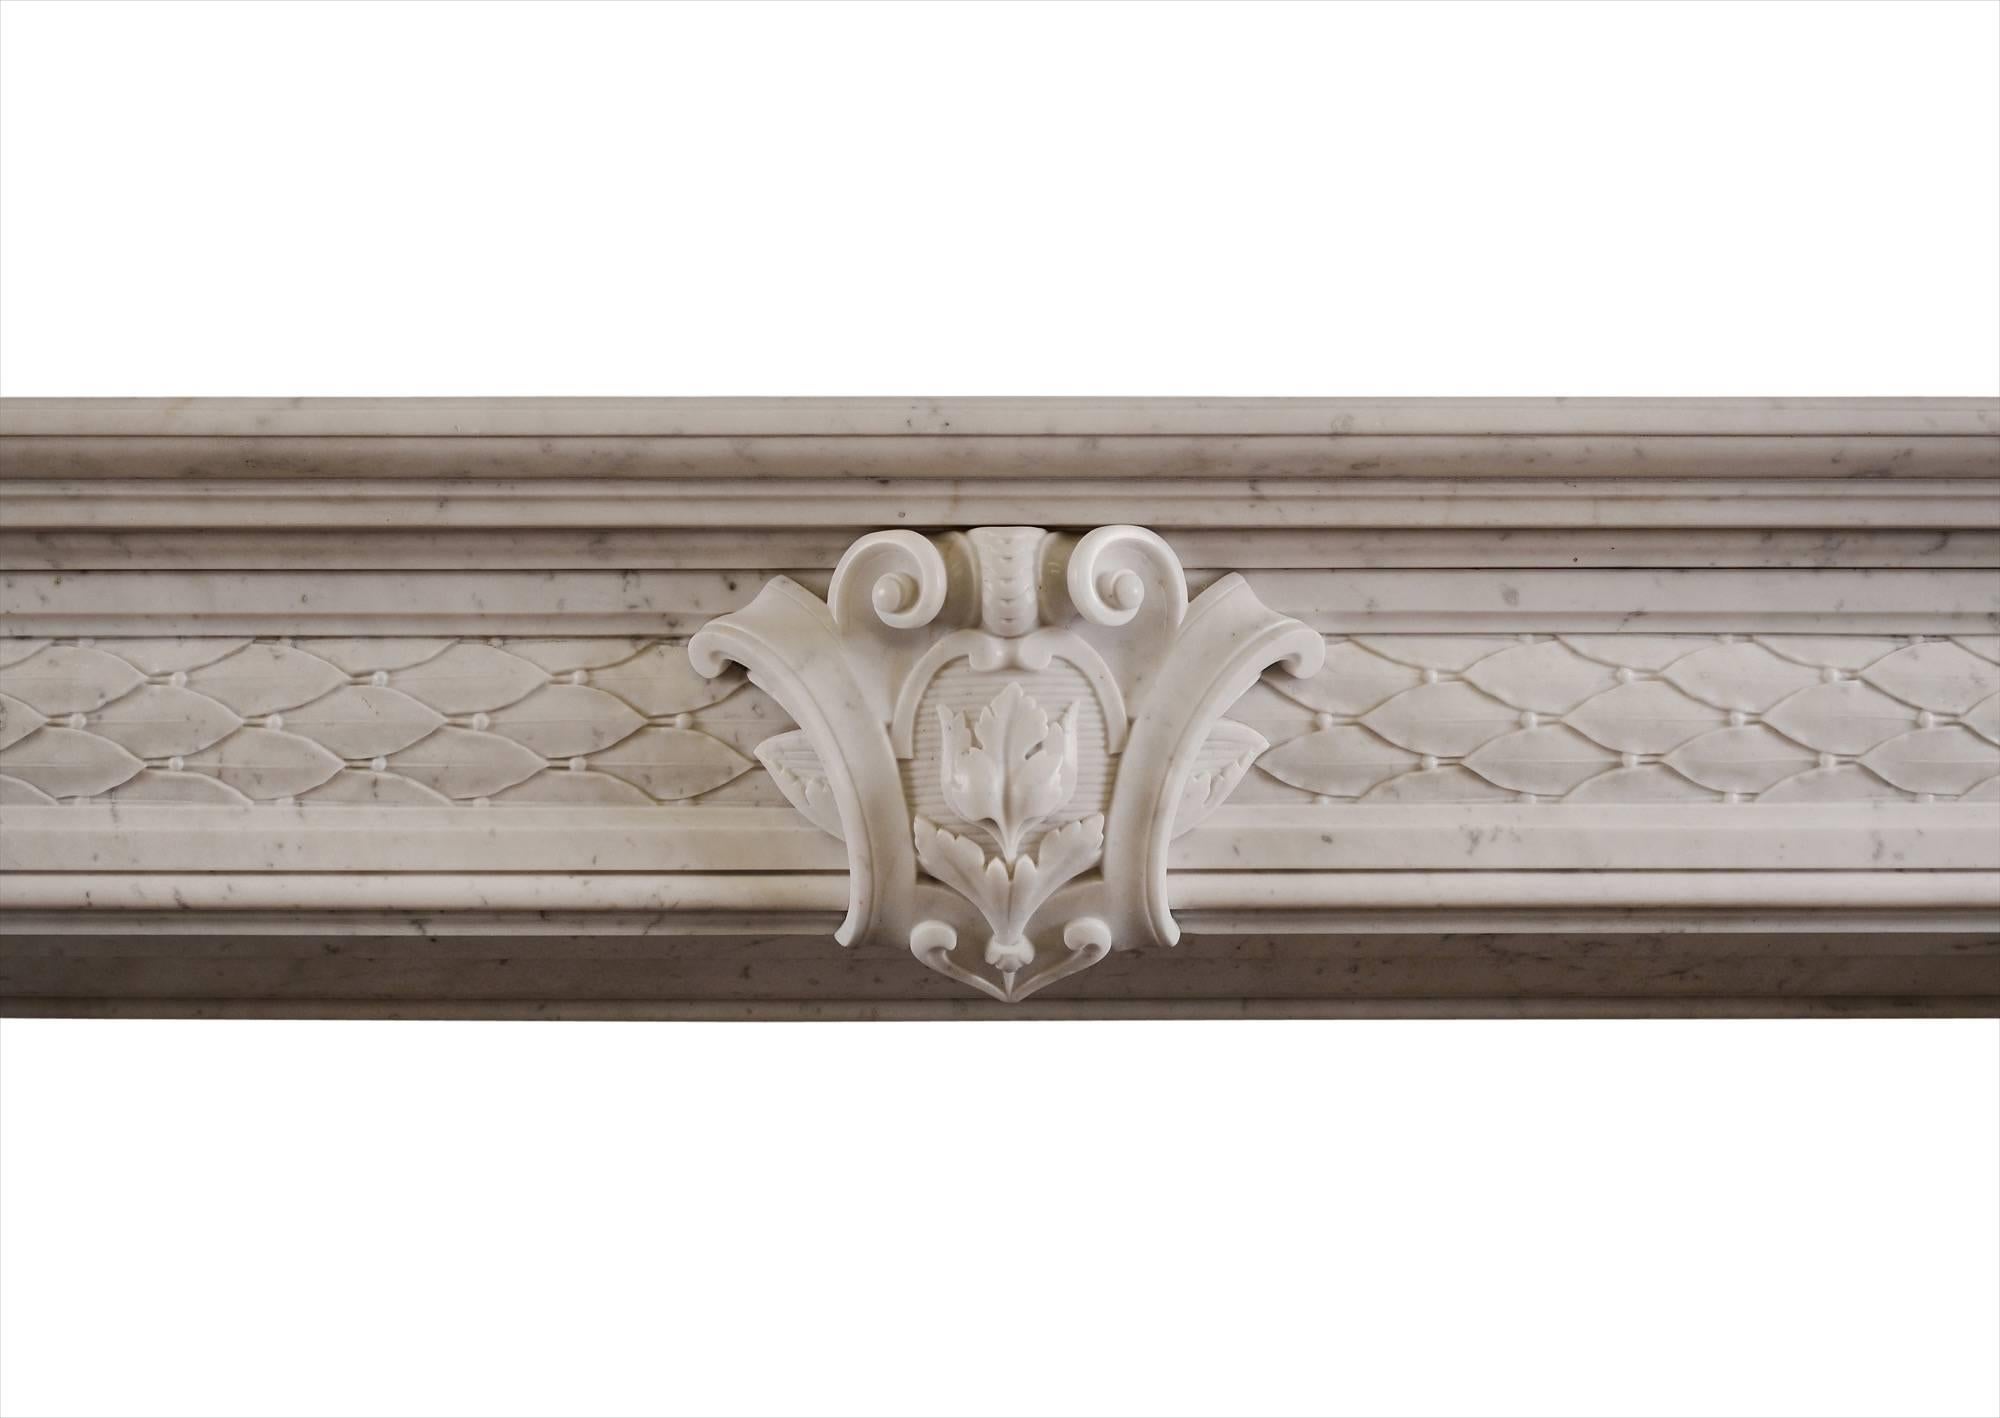 A 19th century white marble fireplace. The jambs and frieze with carved leafwork and berries throughout and carved cartouche to centre. Moulded shelf above.

Measurements:
Shelf width - 1735 mm / 68 1/4 in.
Overall height - 1195 mm / 47 in.
Opening